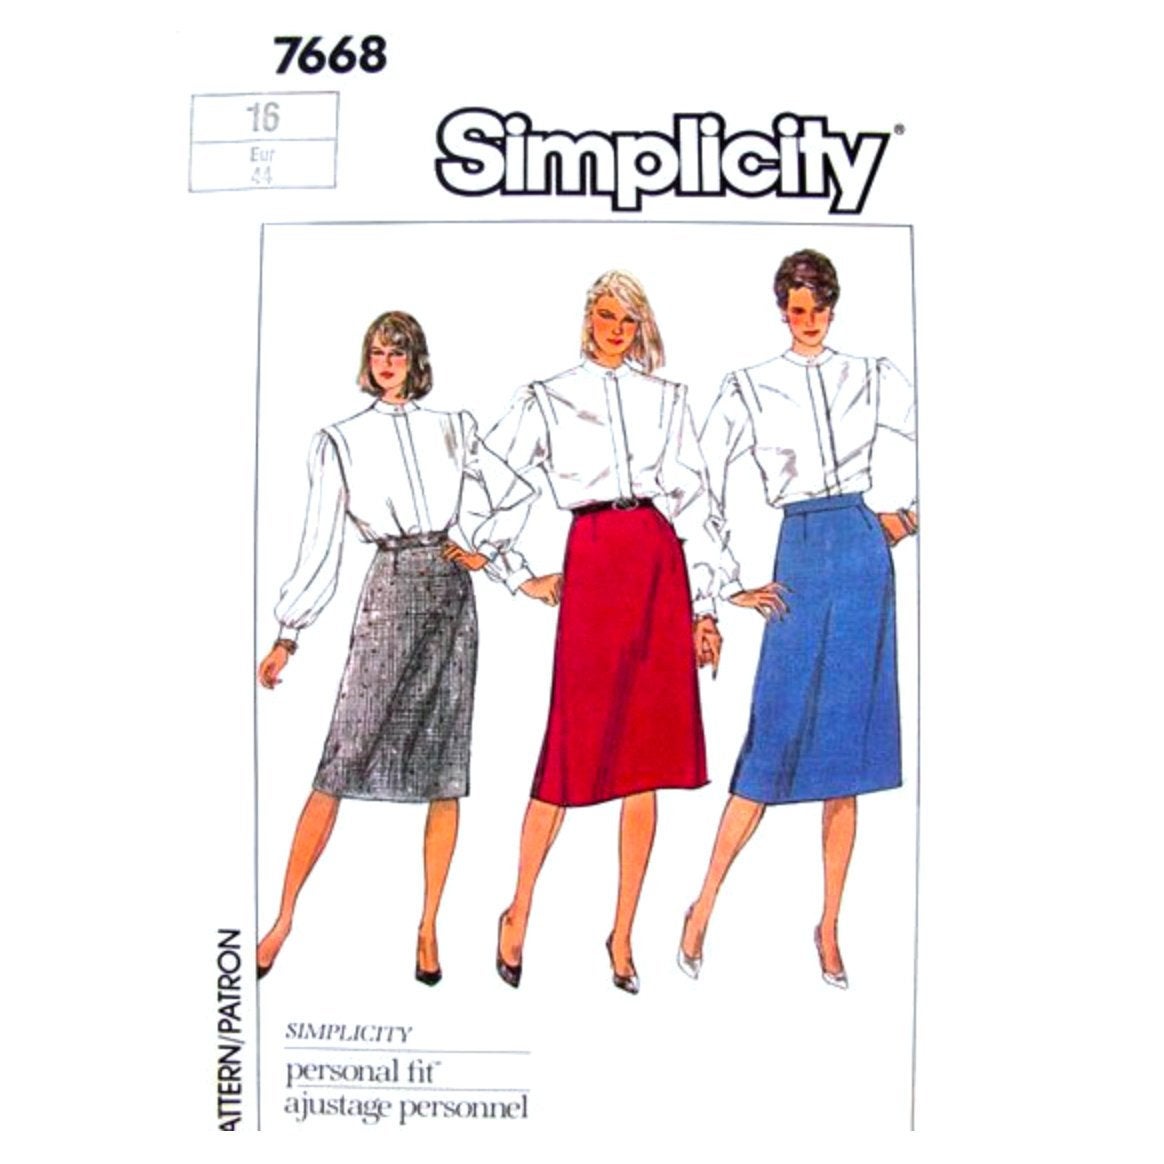 Simplicity 7668 skirt sewing pattern